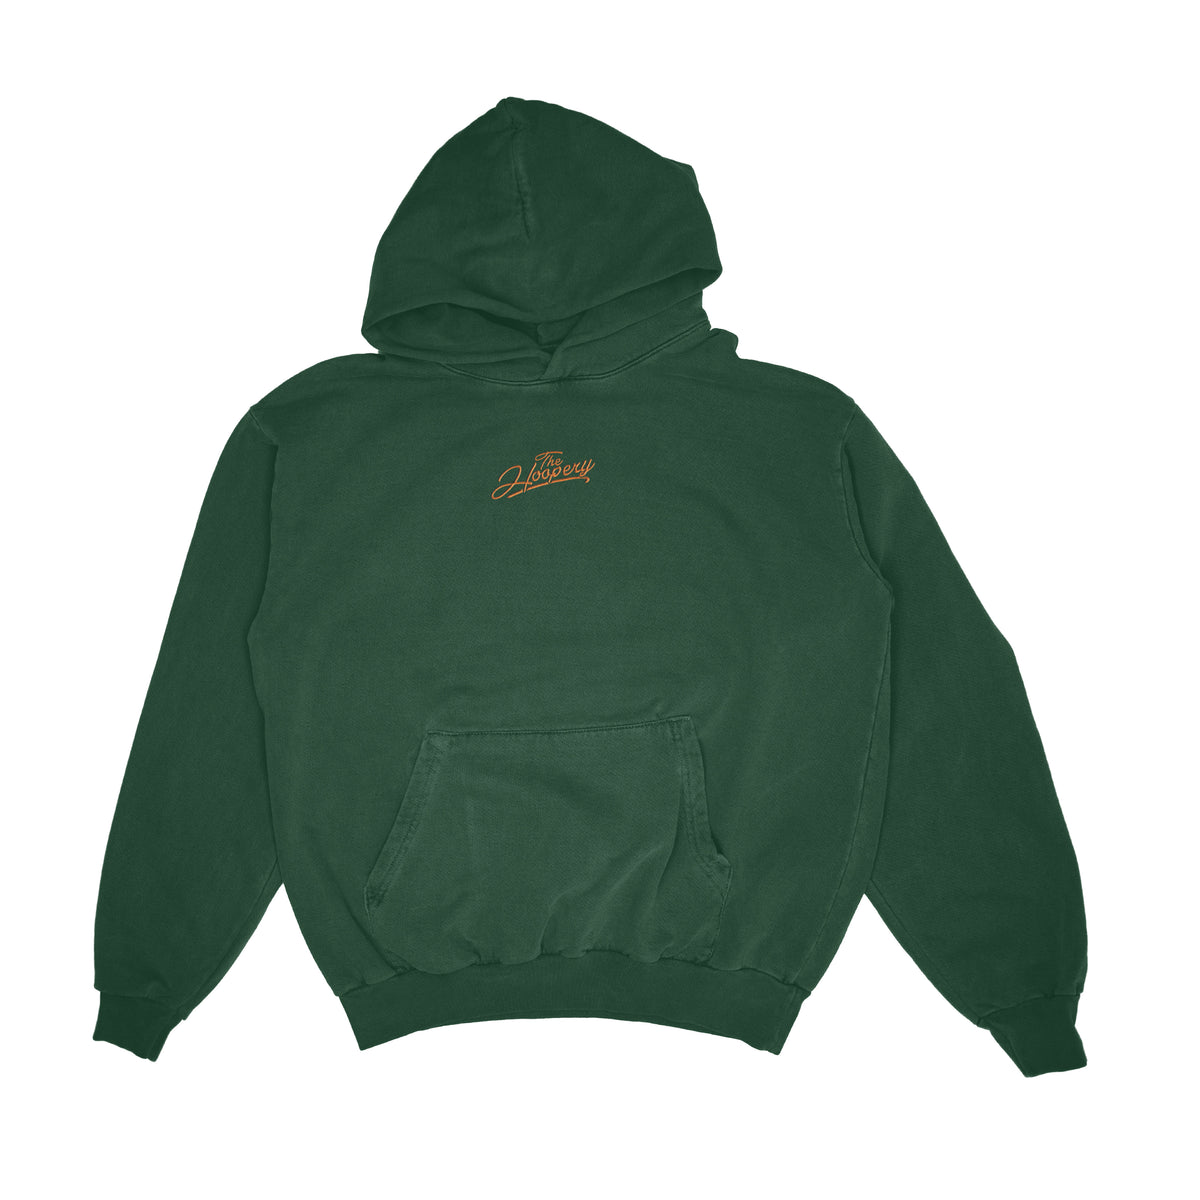 LOGO SCRIPT Embroidered Pullover Hoodie